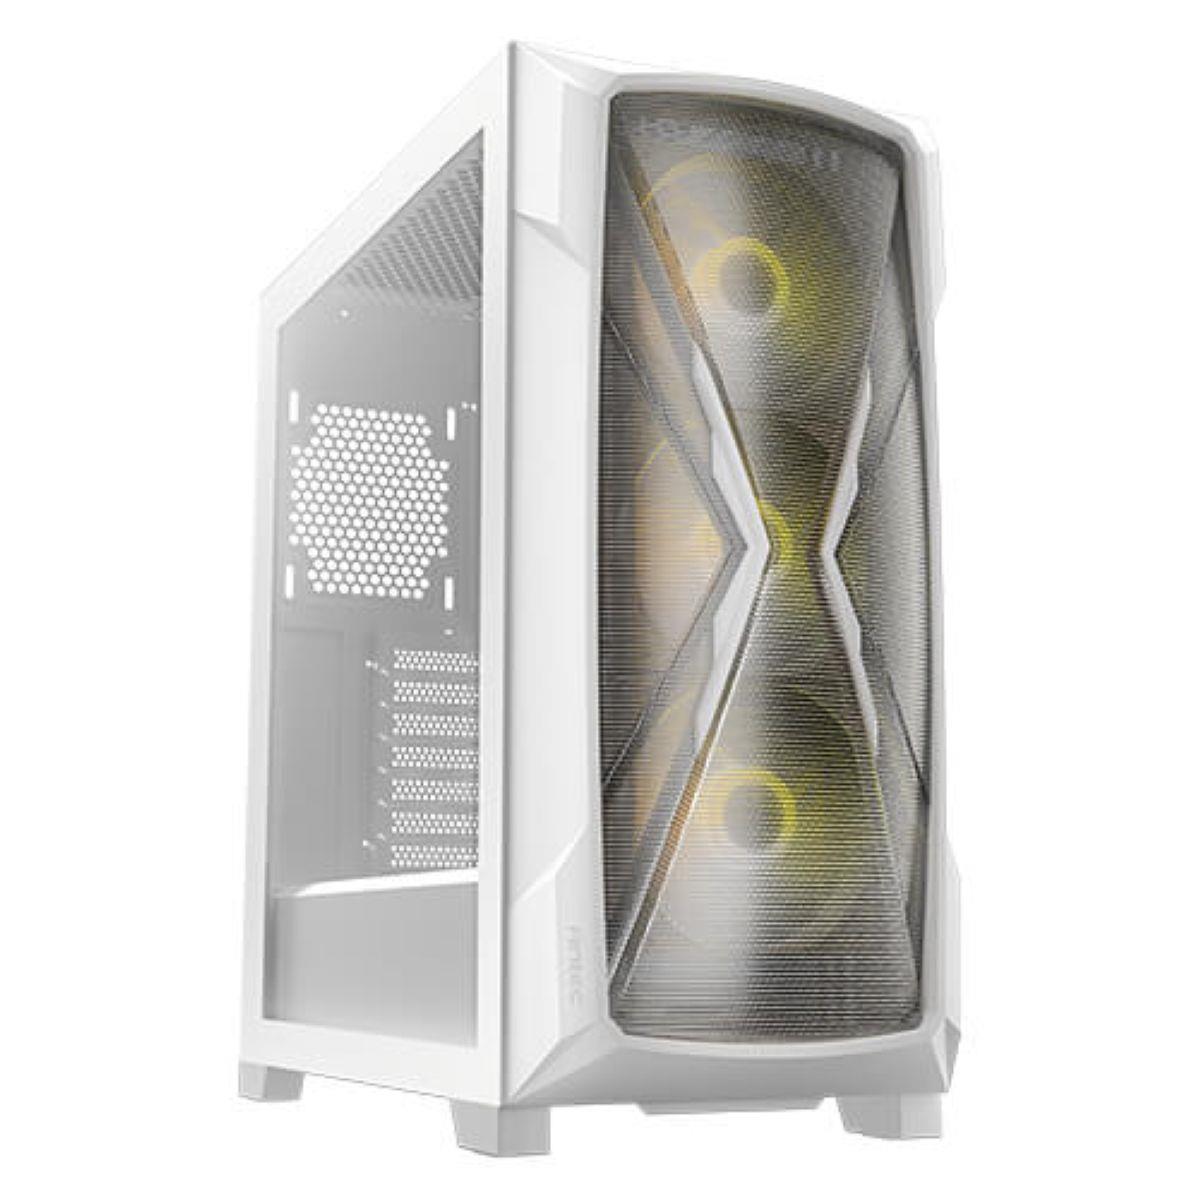 Image of Antec DP505 ARGB Tempered Glass E-ATX Mid-Tower Gaming Computer Case